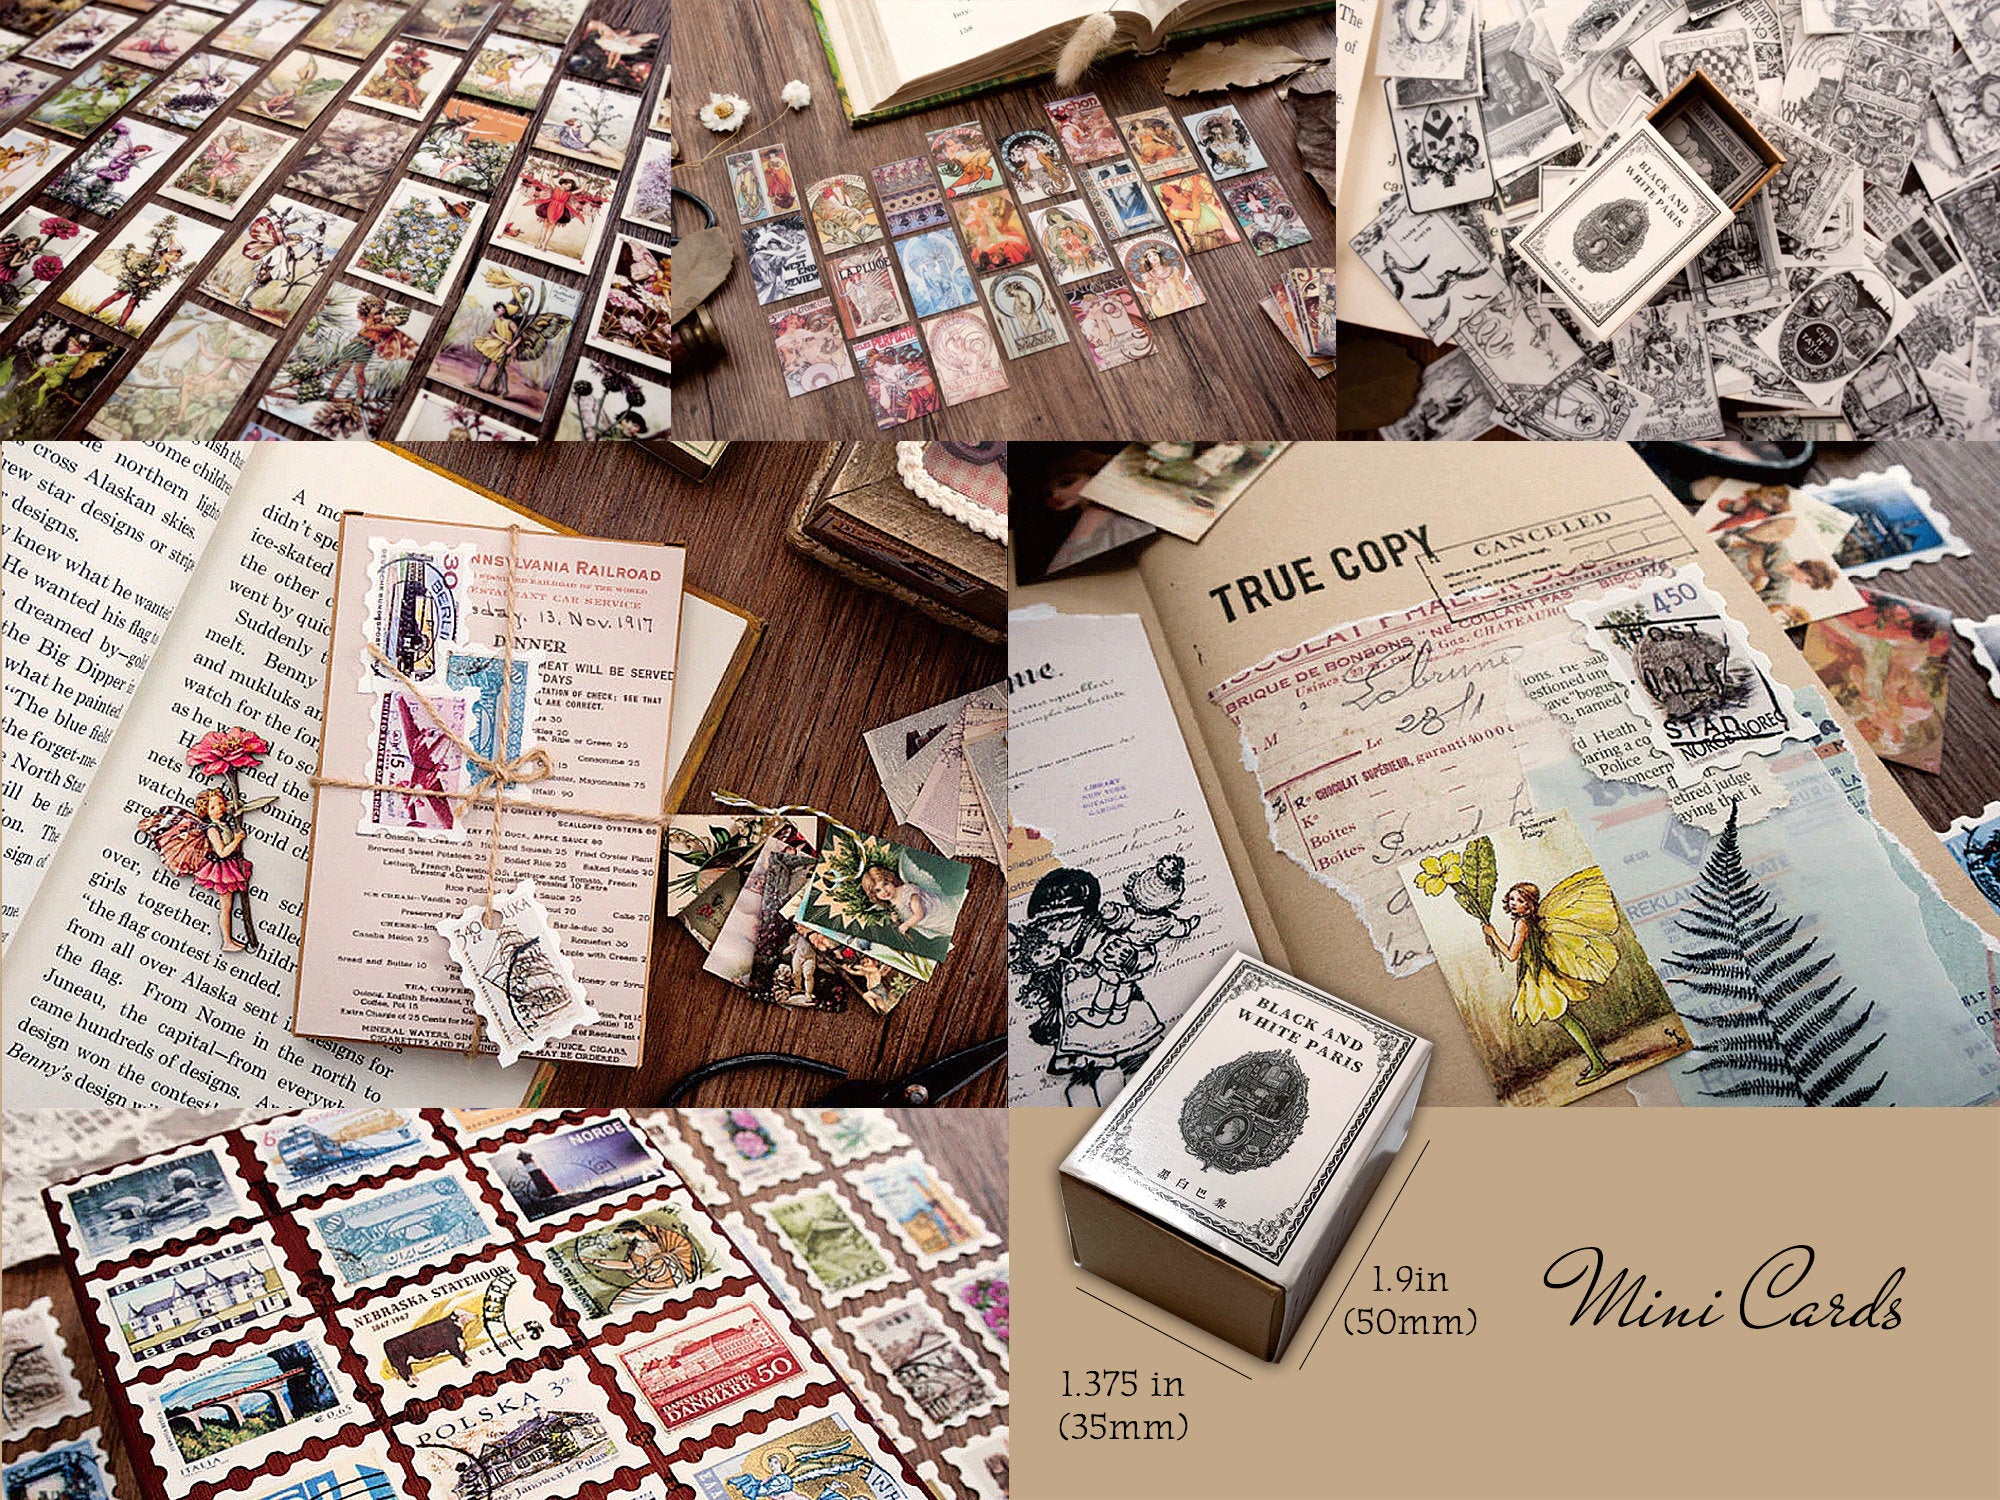 100 Mini Cards, Ideal for Scrapbooking Projects, Various Subjects, Ex Libris, Angels, Fairies, Stamps, Victorian Posters, 1.9in x 1.3in